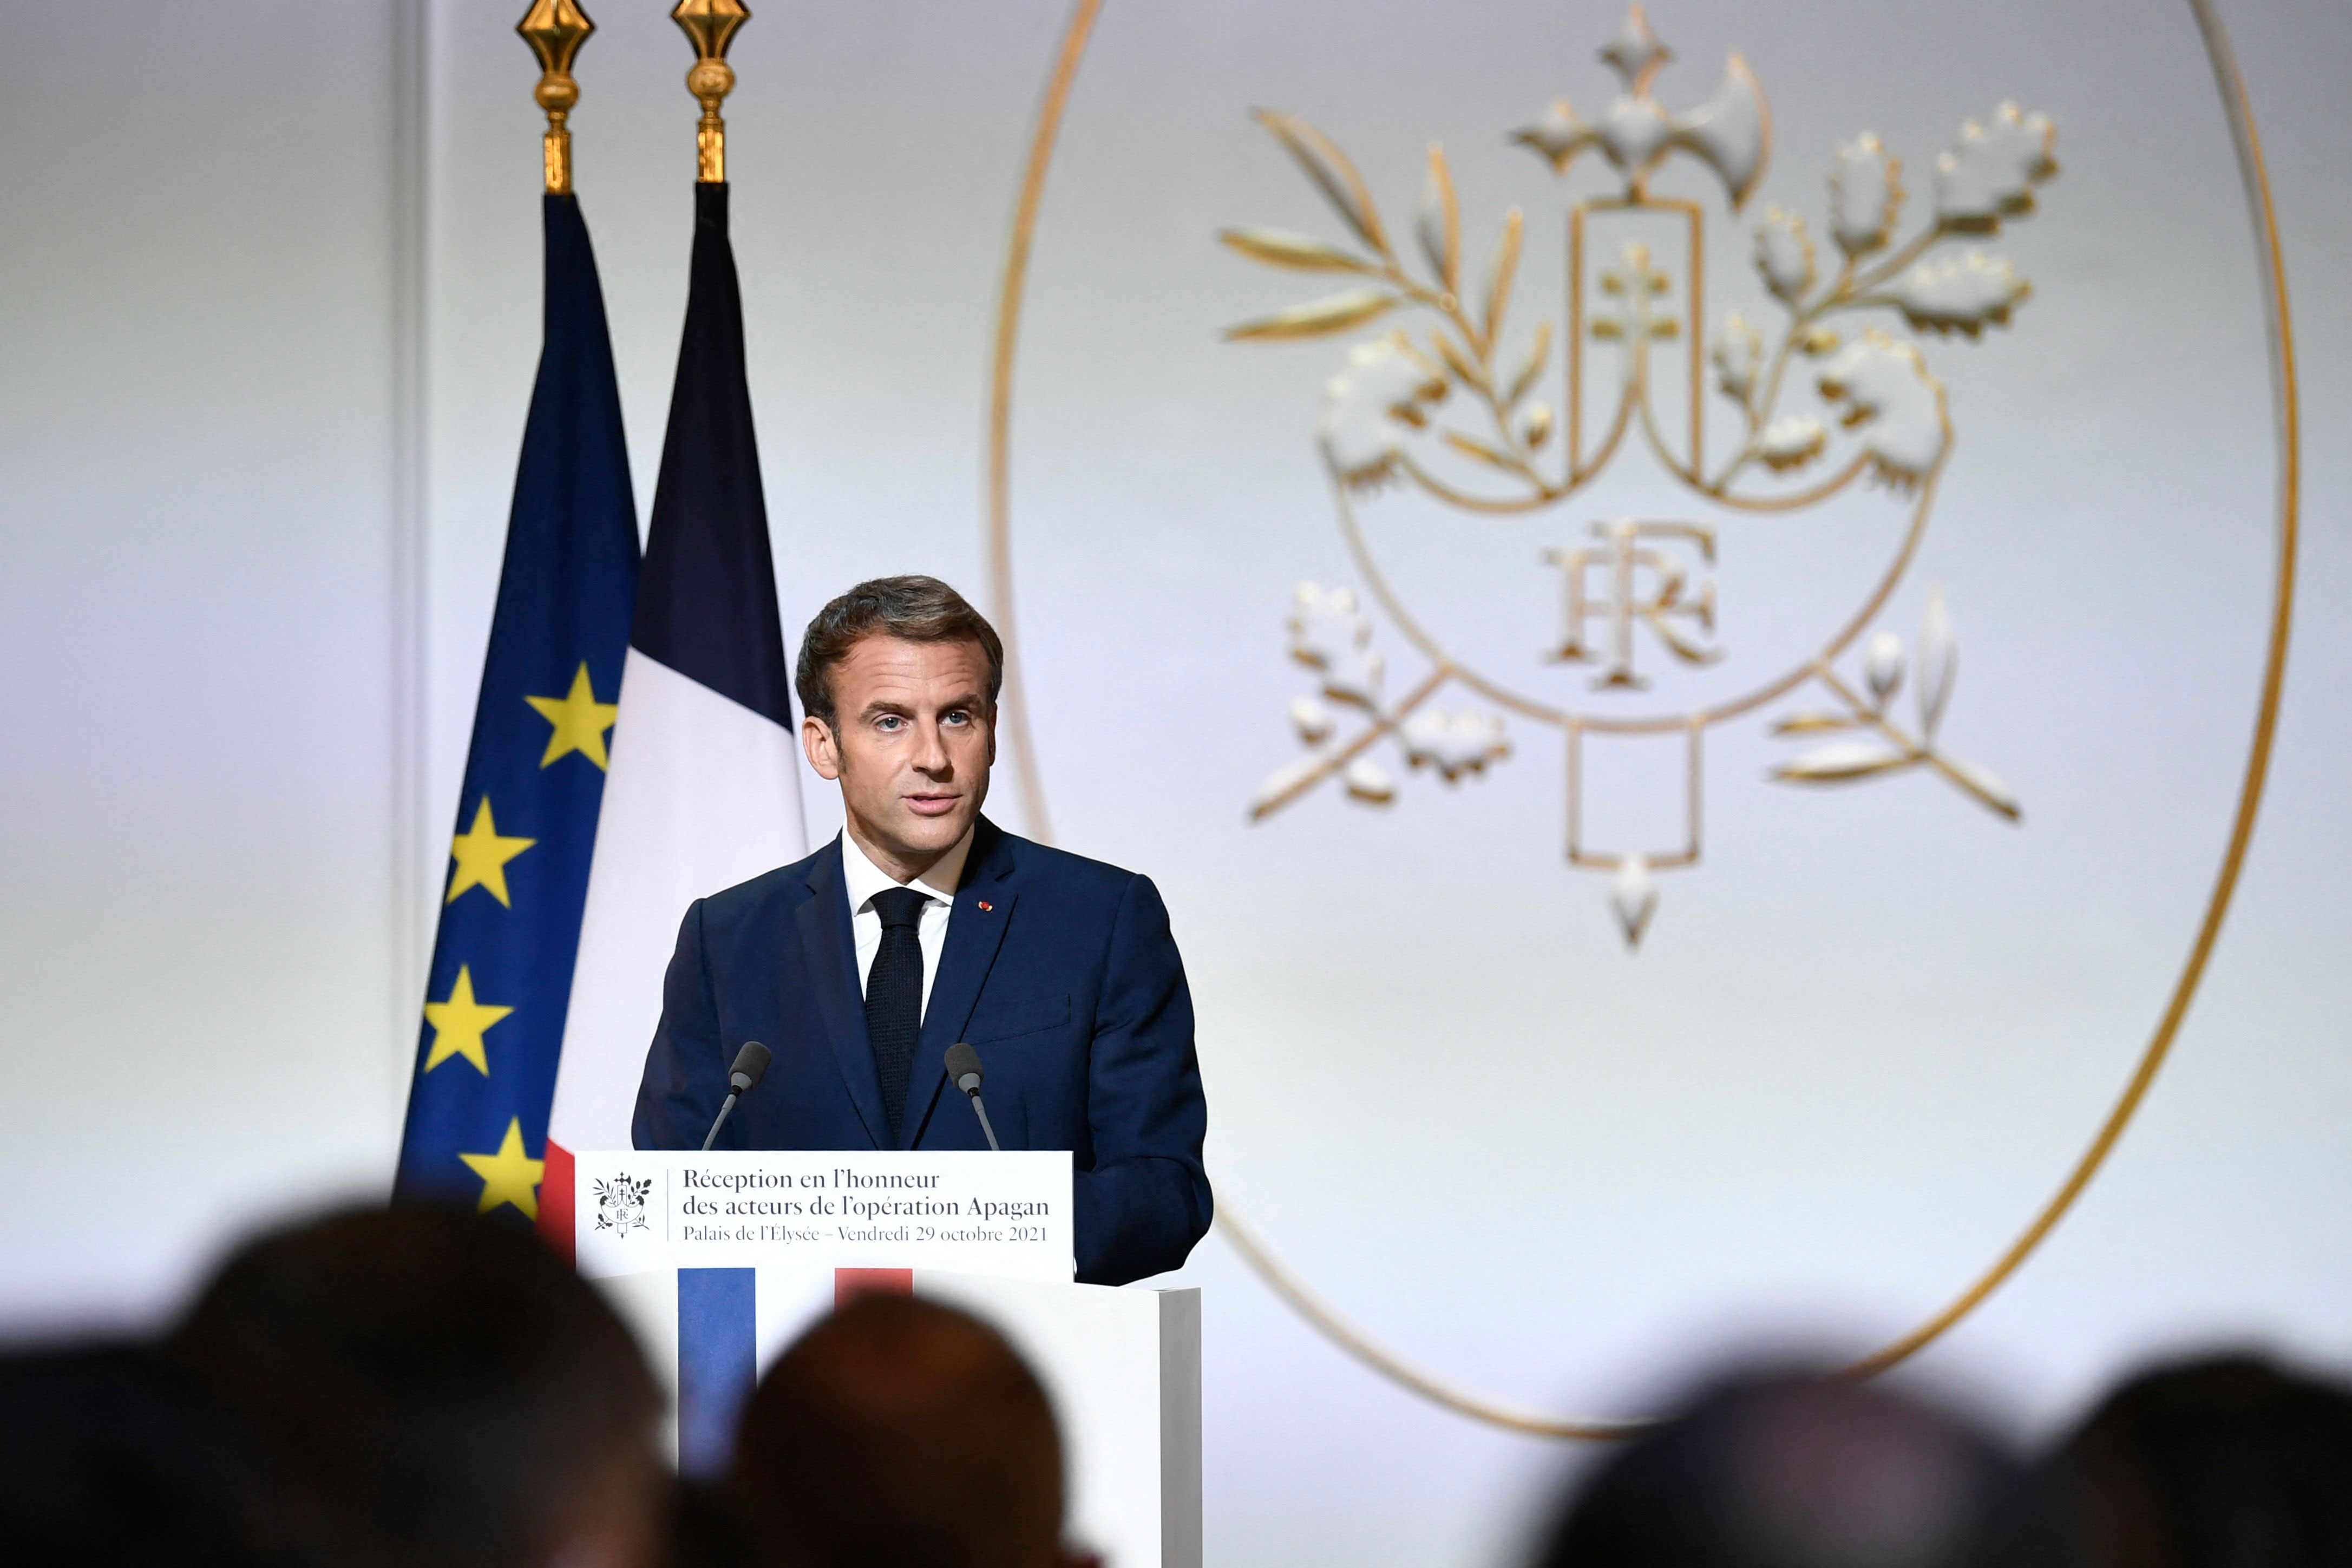 French President Emmanuel Macron delivers a speech at the Élysée Palace in Paris on October 29.